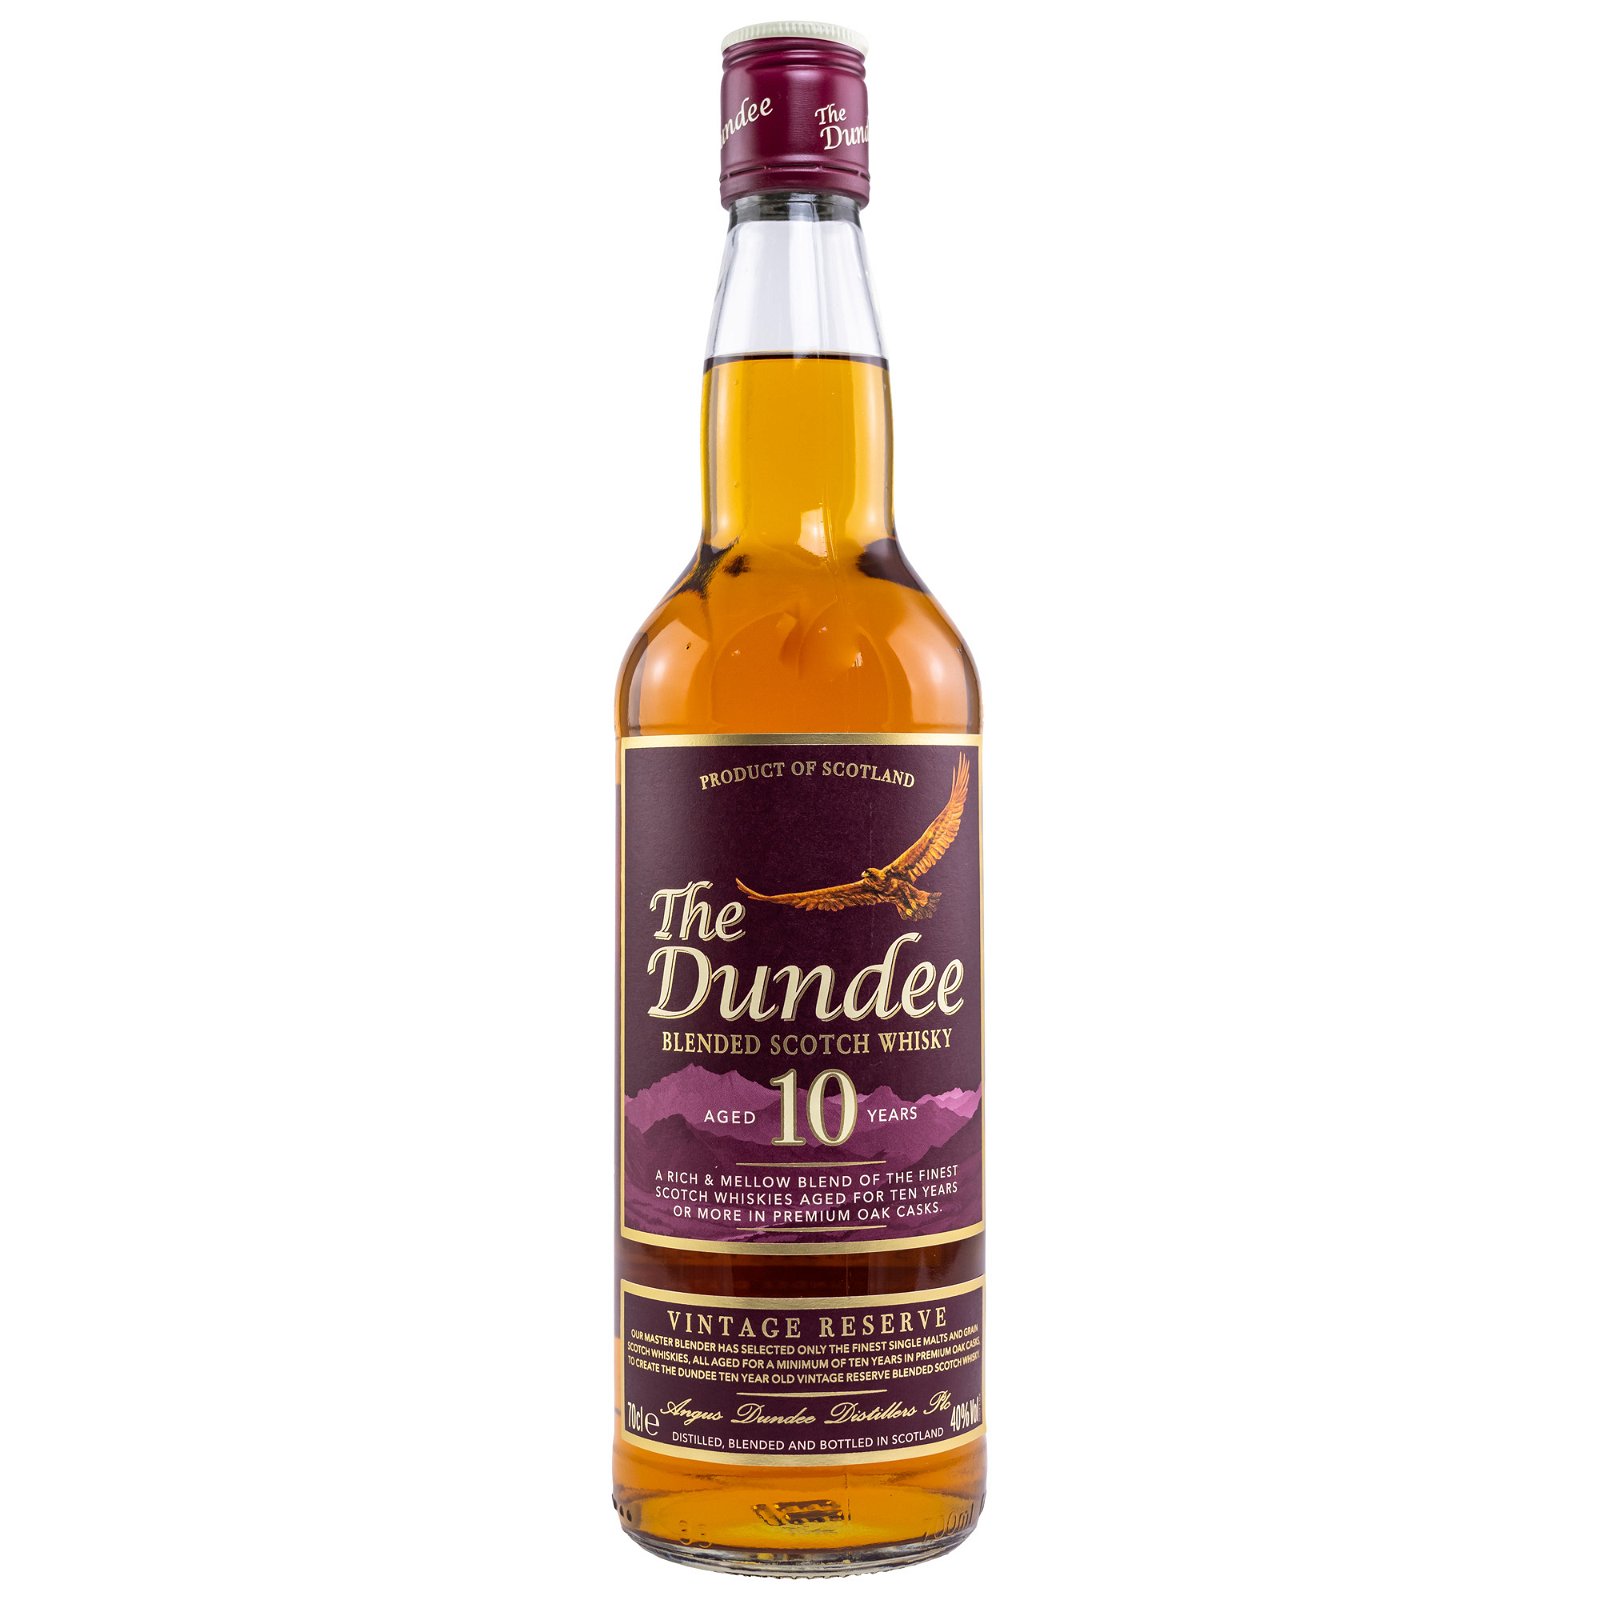 The Dundee 10 Jahre Vintage Reserve Blended Scotch